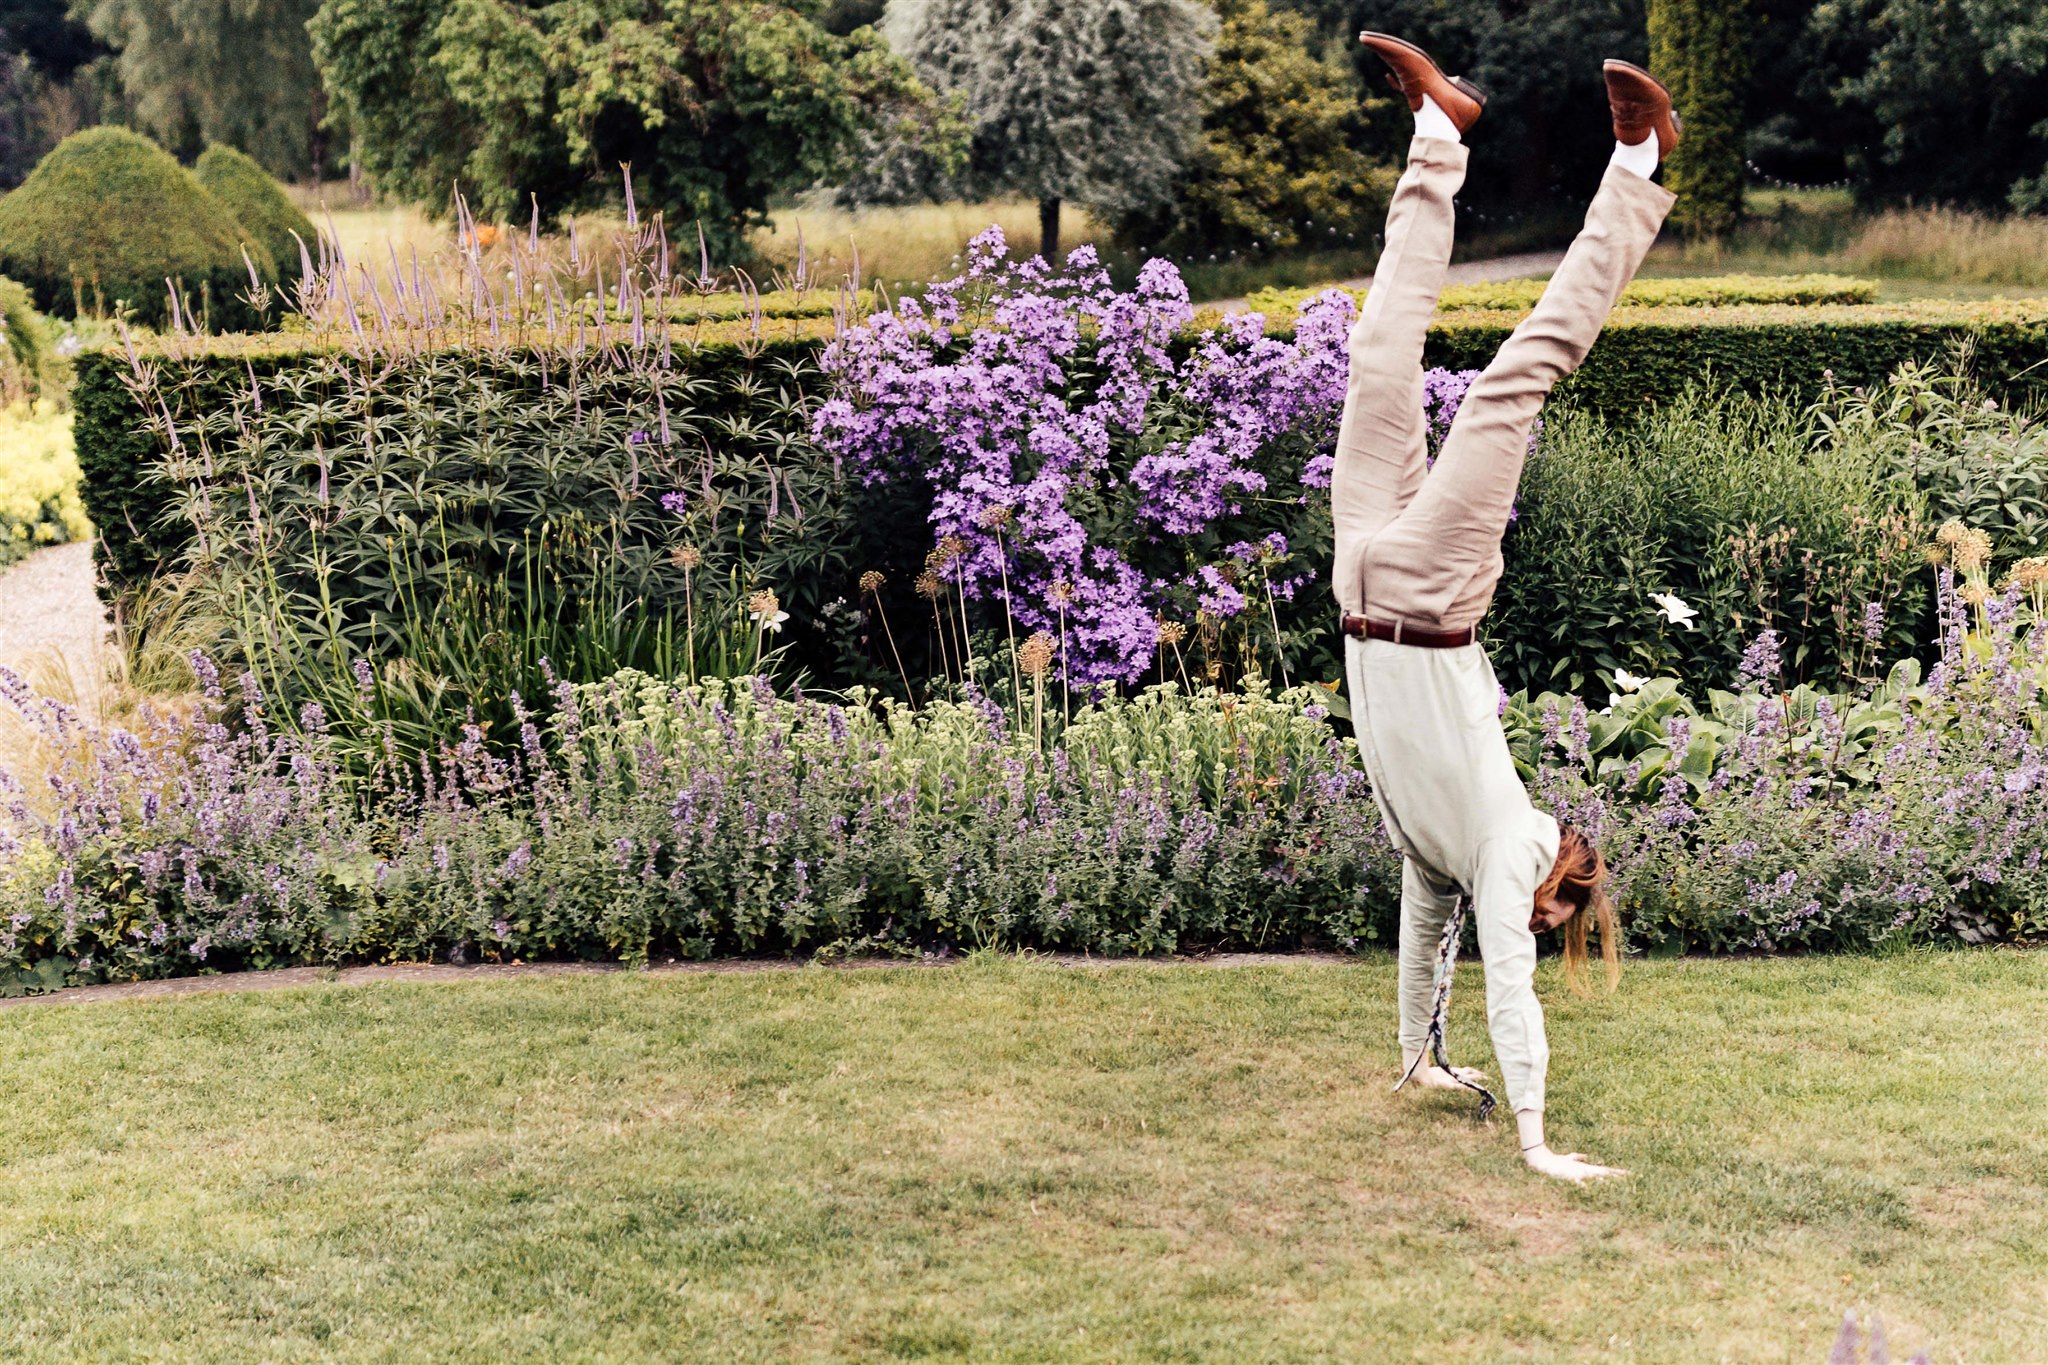 A man with beige trousers and a cream shirt and floral tie is captured doing a handstand in an English country garden against a backdrop of catmint and salvias